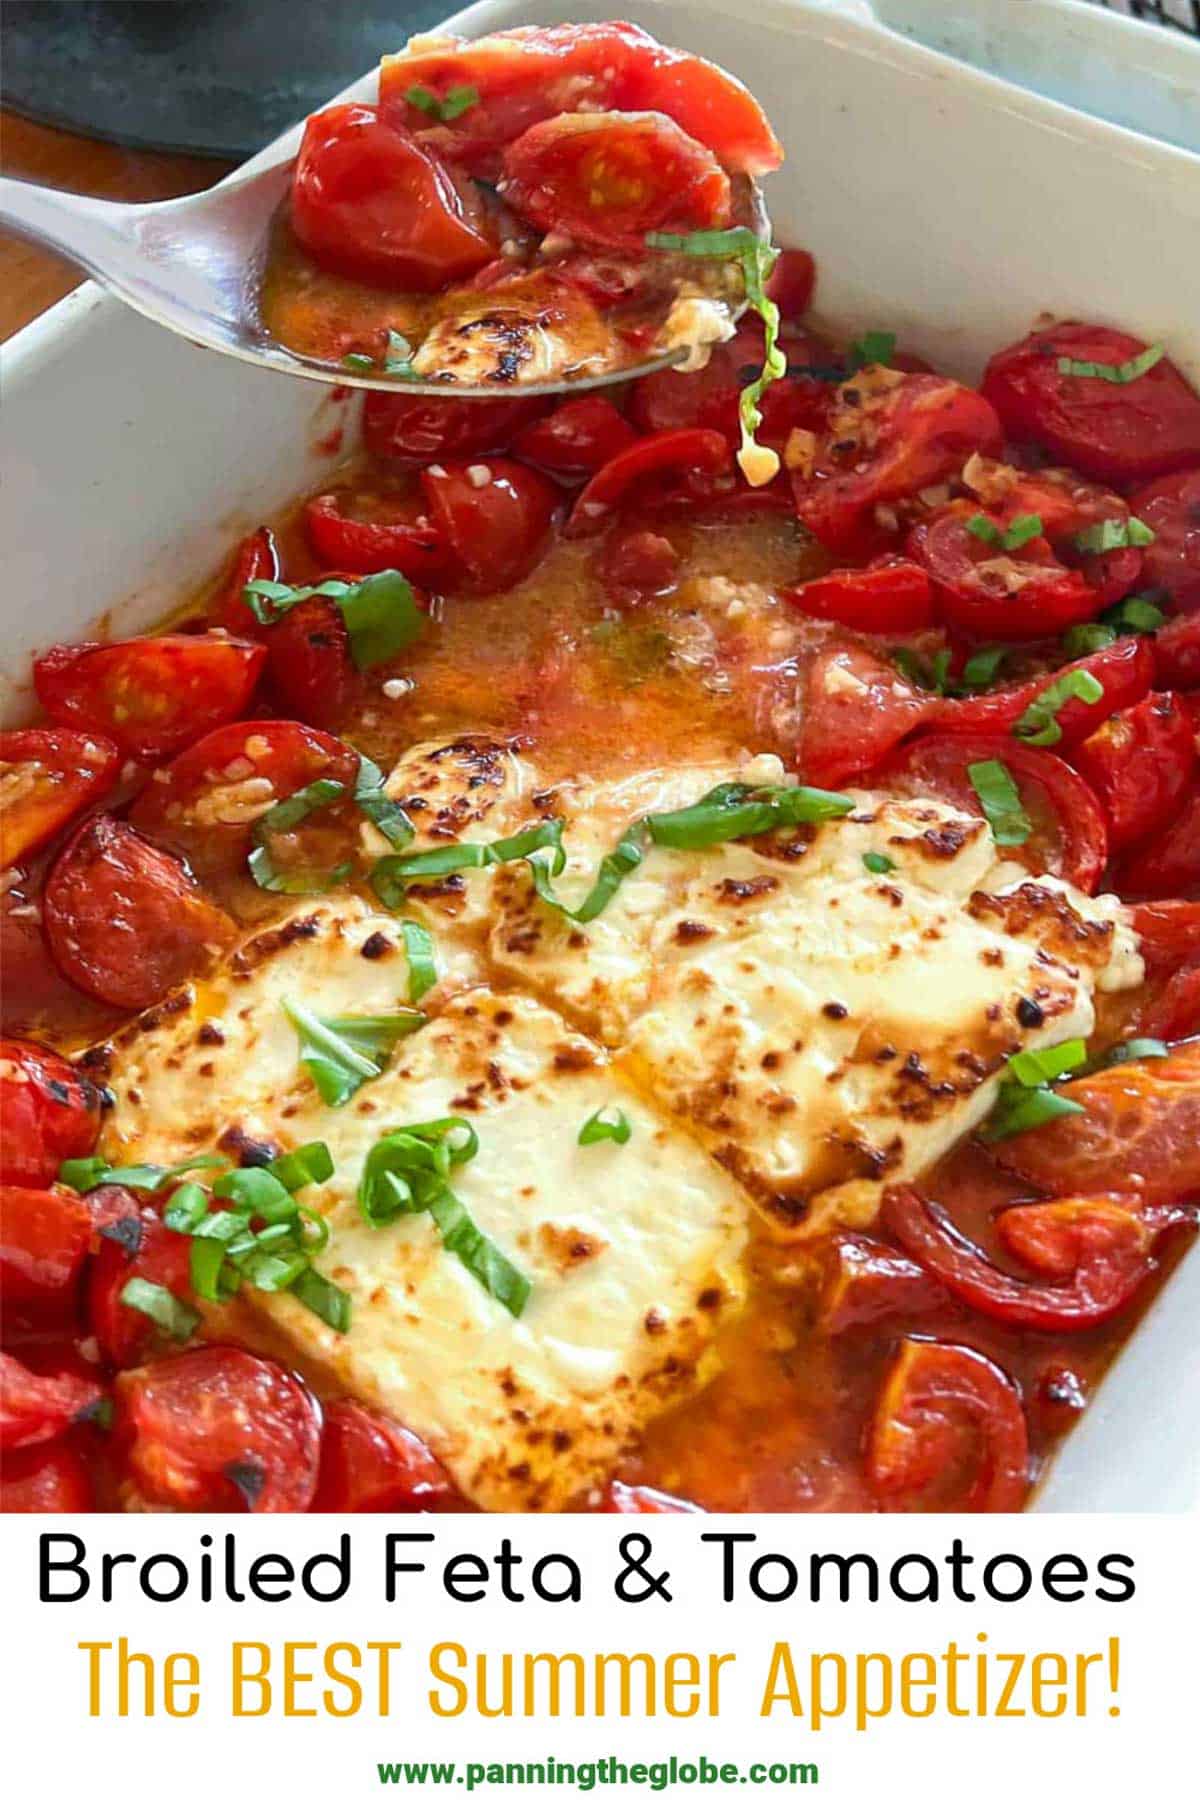 Broiled Feta and Tomatoes: The Best Summer Appetizer